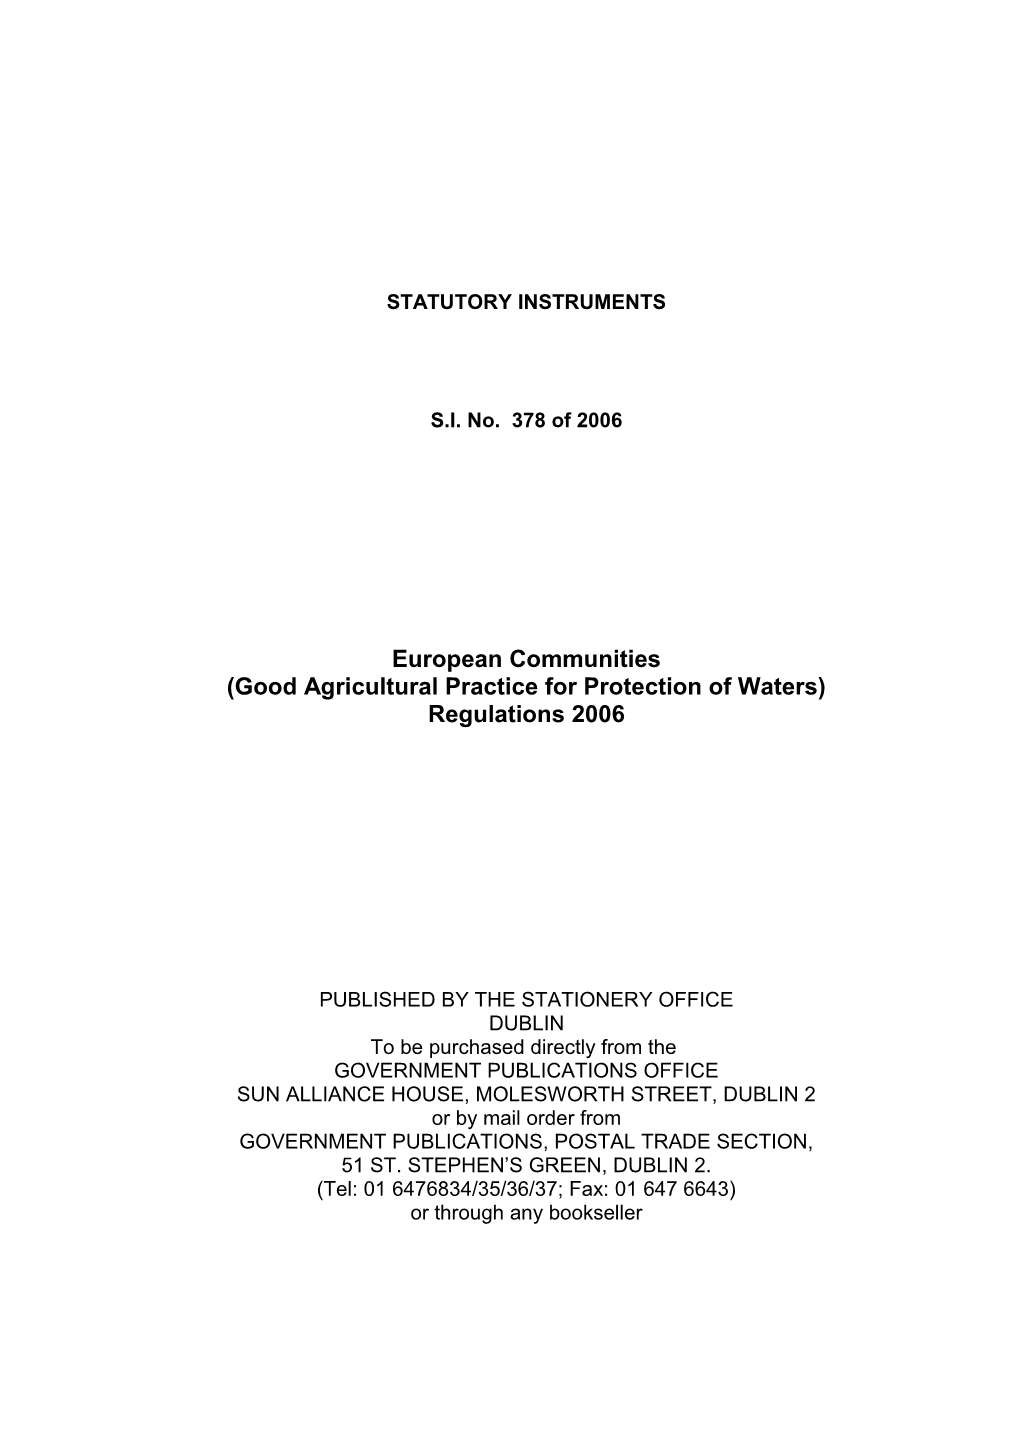 (Good Agricultural Practice for Protection of Waters) Regulations 2006